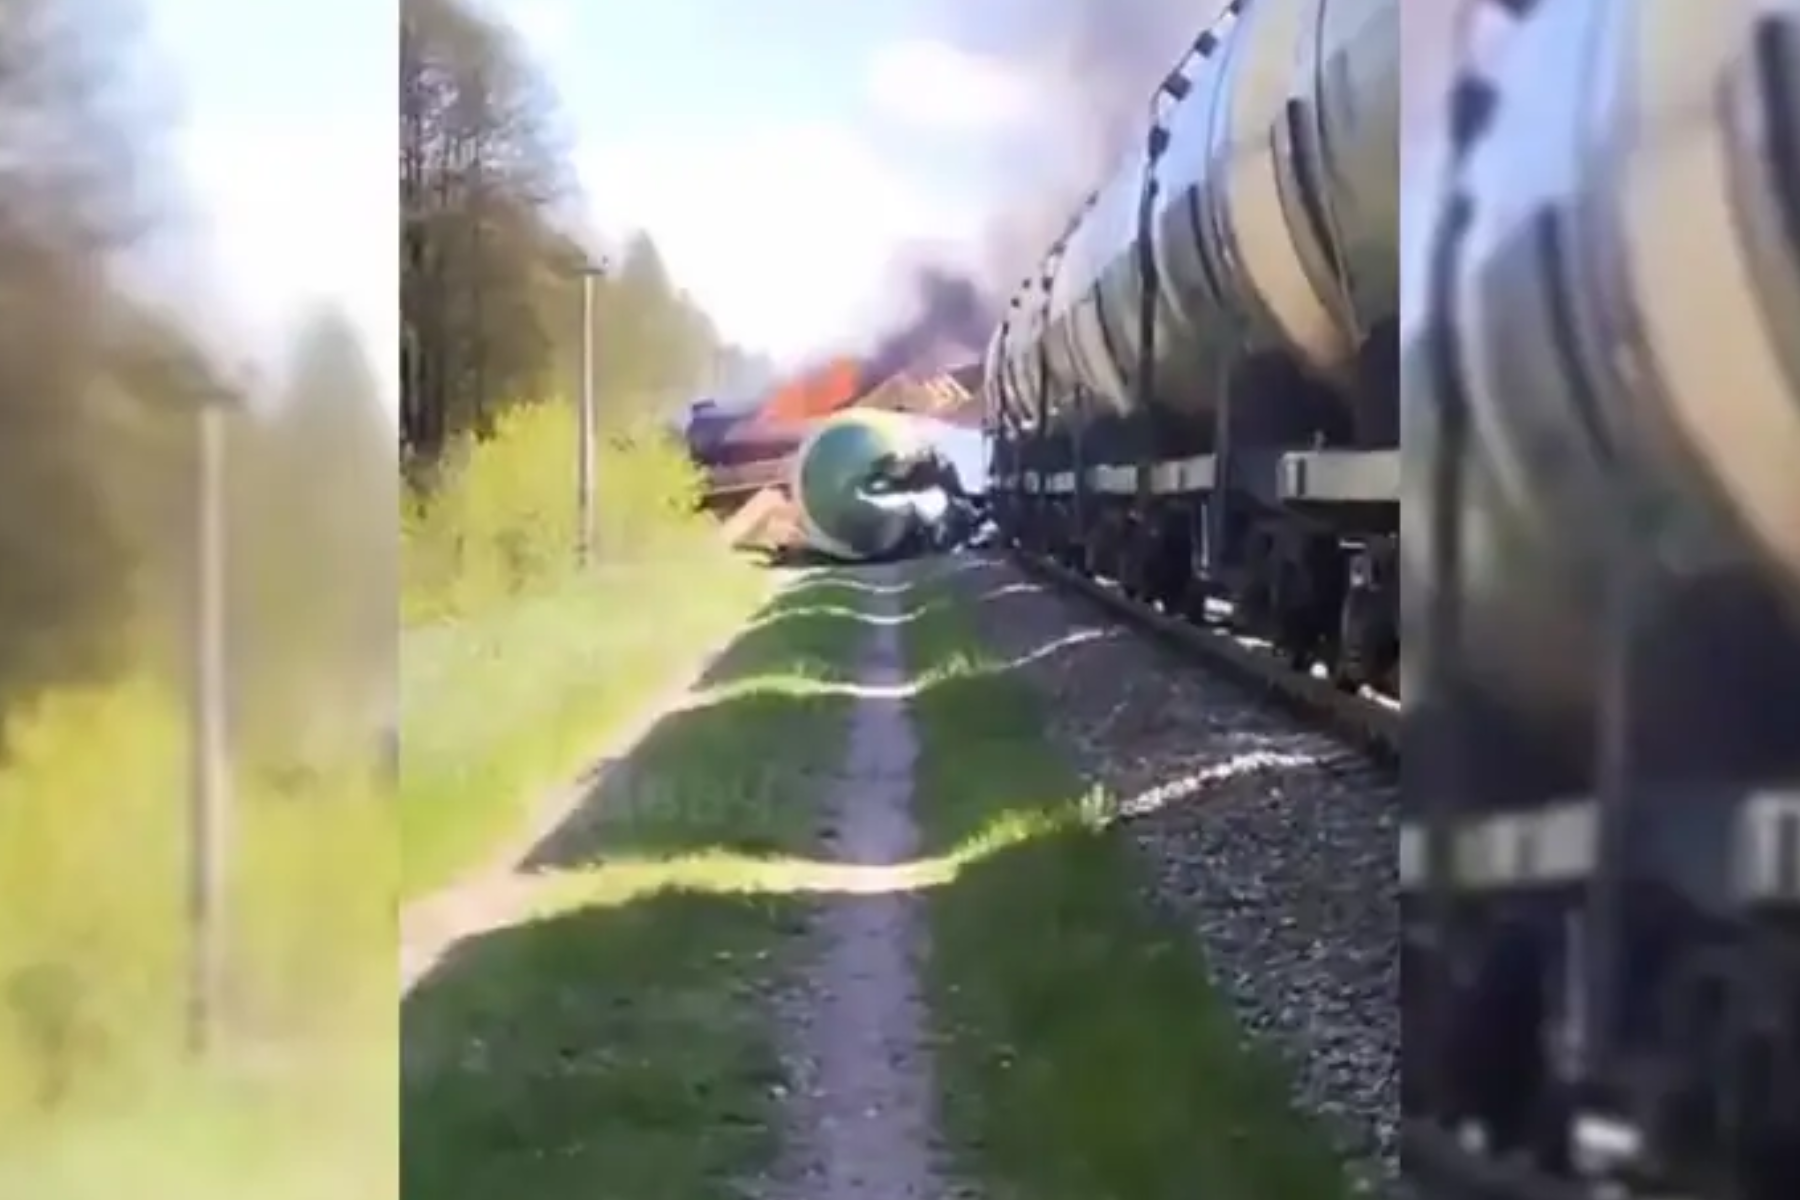 A video frame showing a derailed train that collided with an unknown explosive device